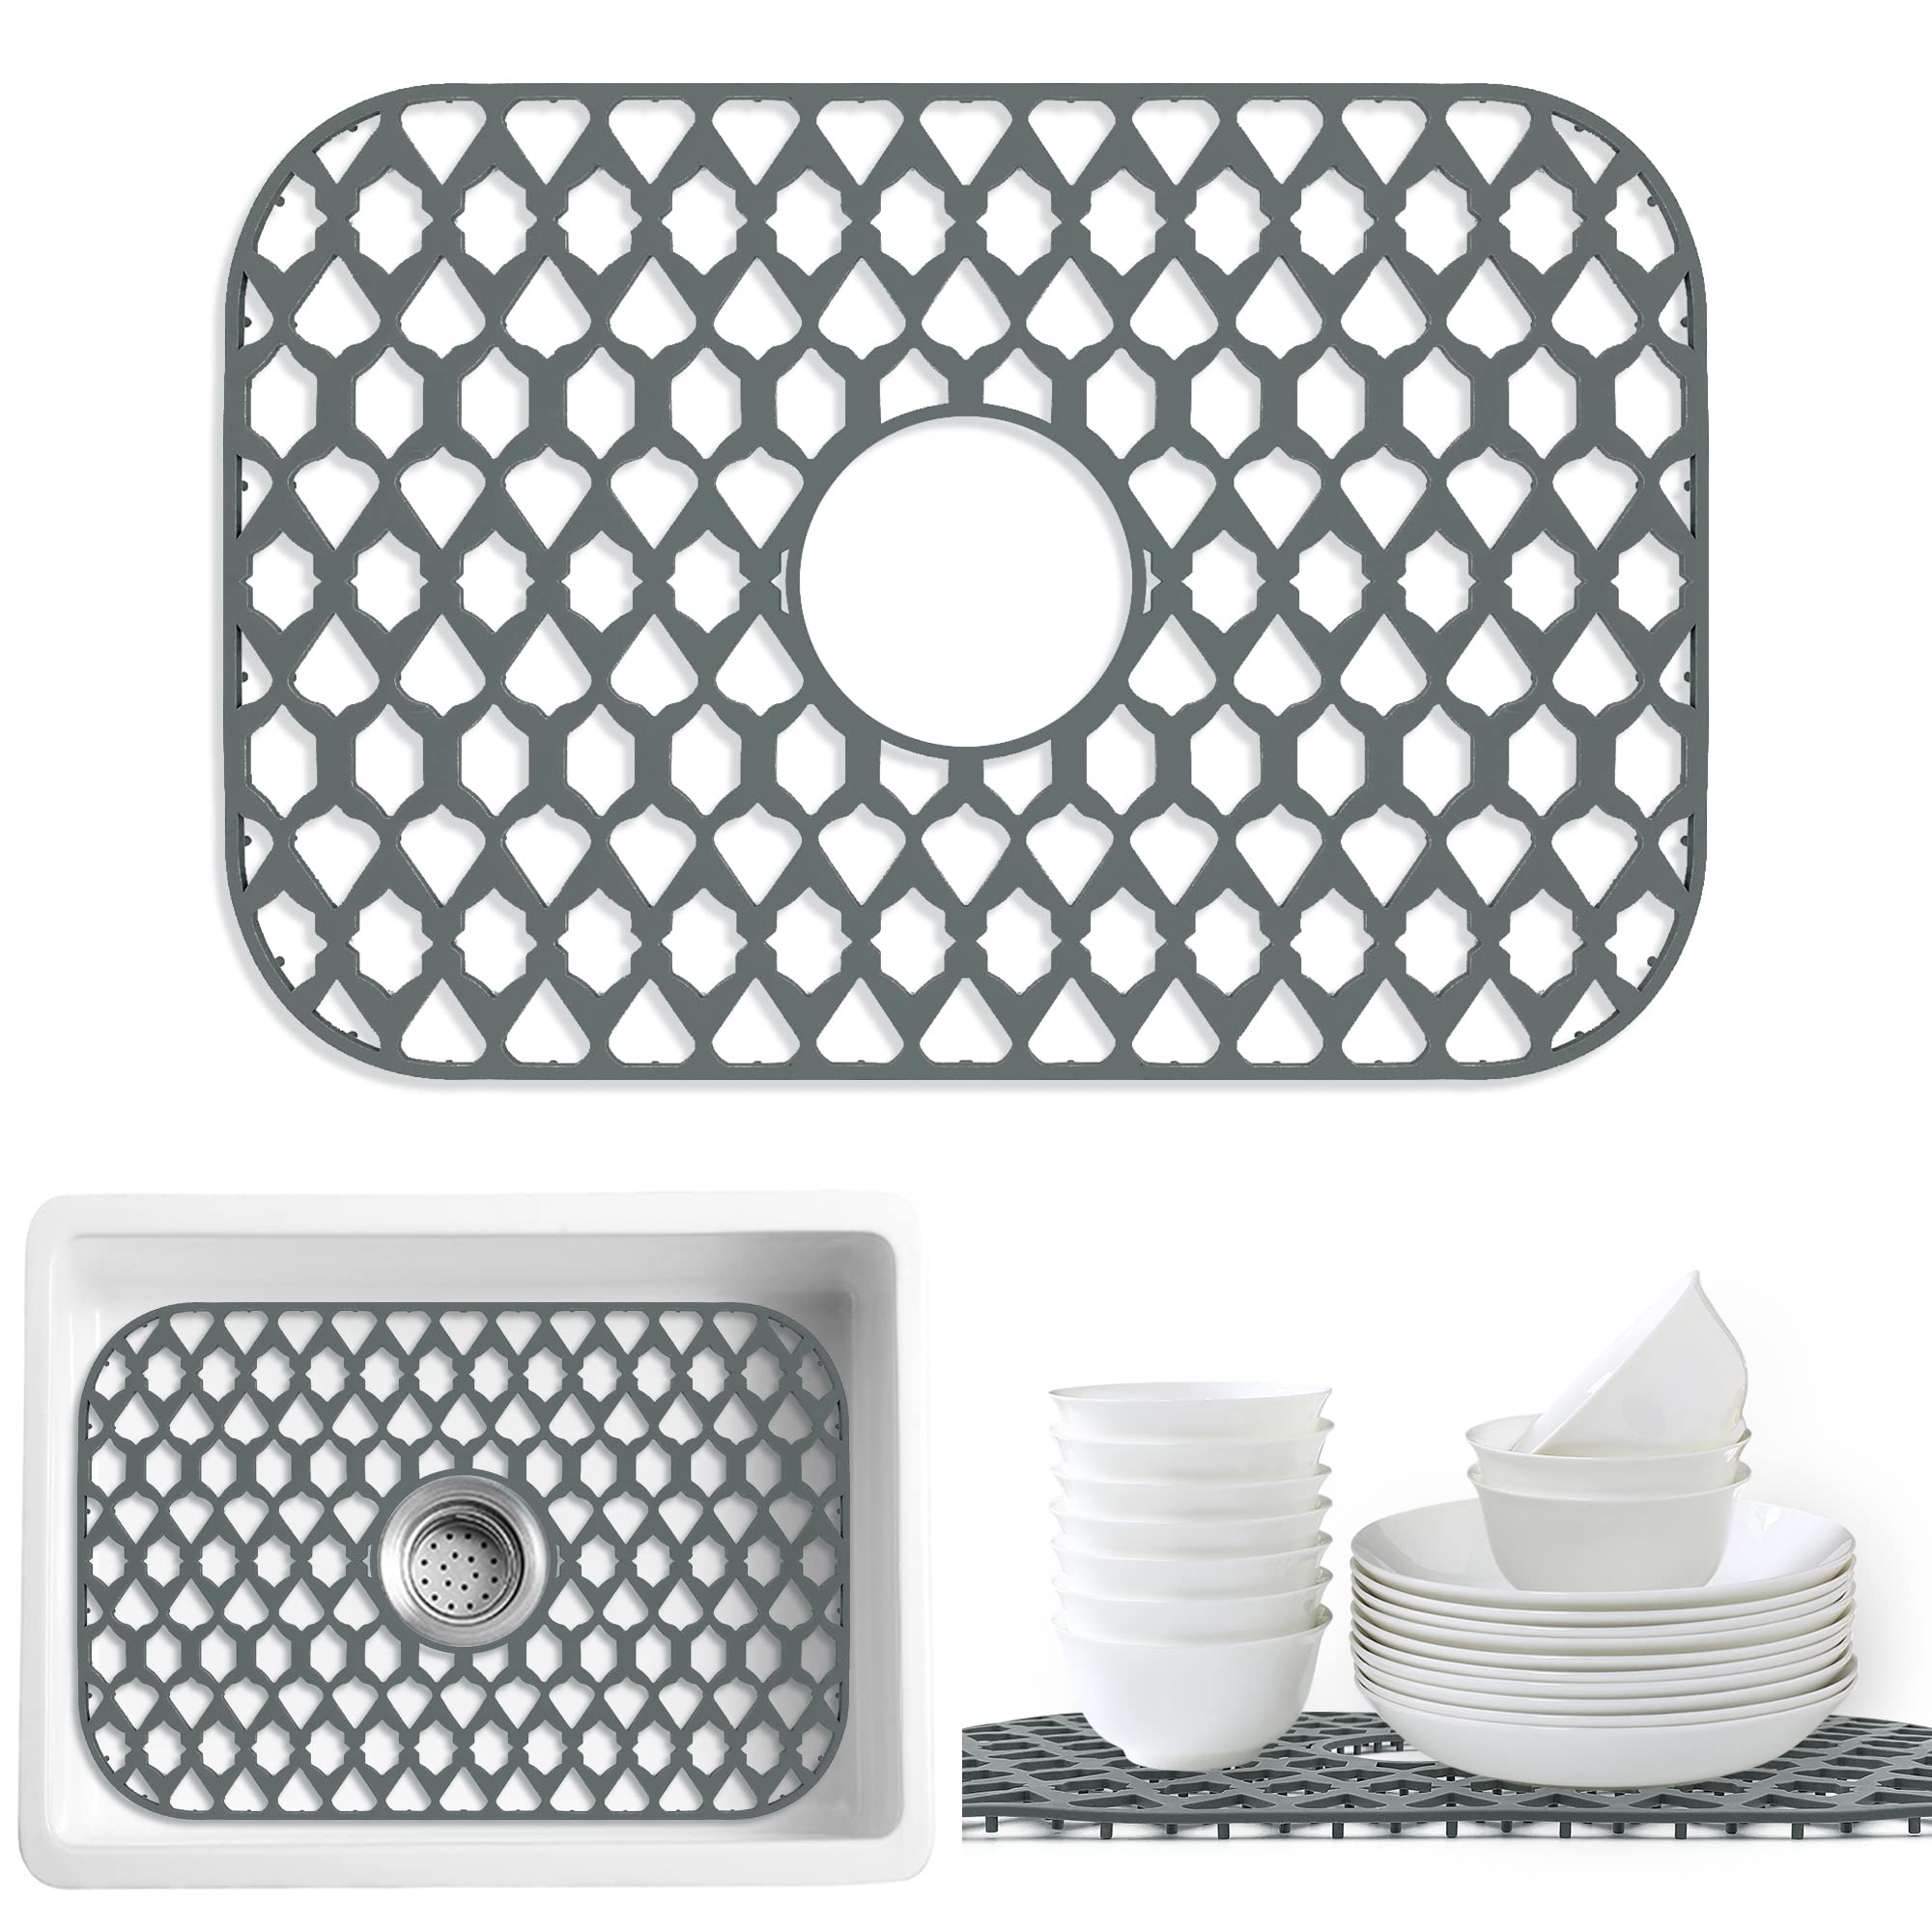 SAMSIER Sink Protectors for Kitchen Sink 13x11&16x12&19x14&22x13&24x13&26x14&28x14&30x16, Large Silicone Sink Mats Grid for Bottom of Farmhouse Stainless Steel Porcelain Sink (19”x13”, Center Drain)